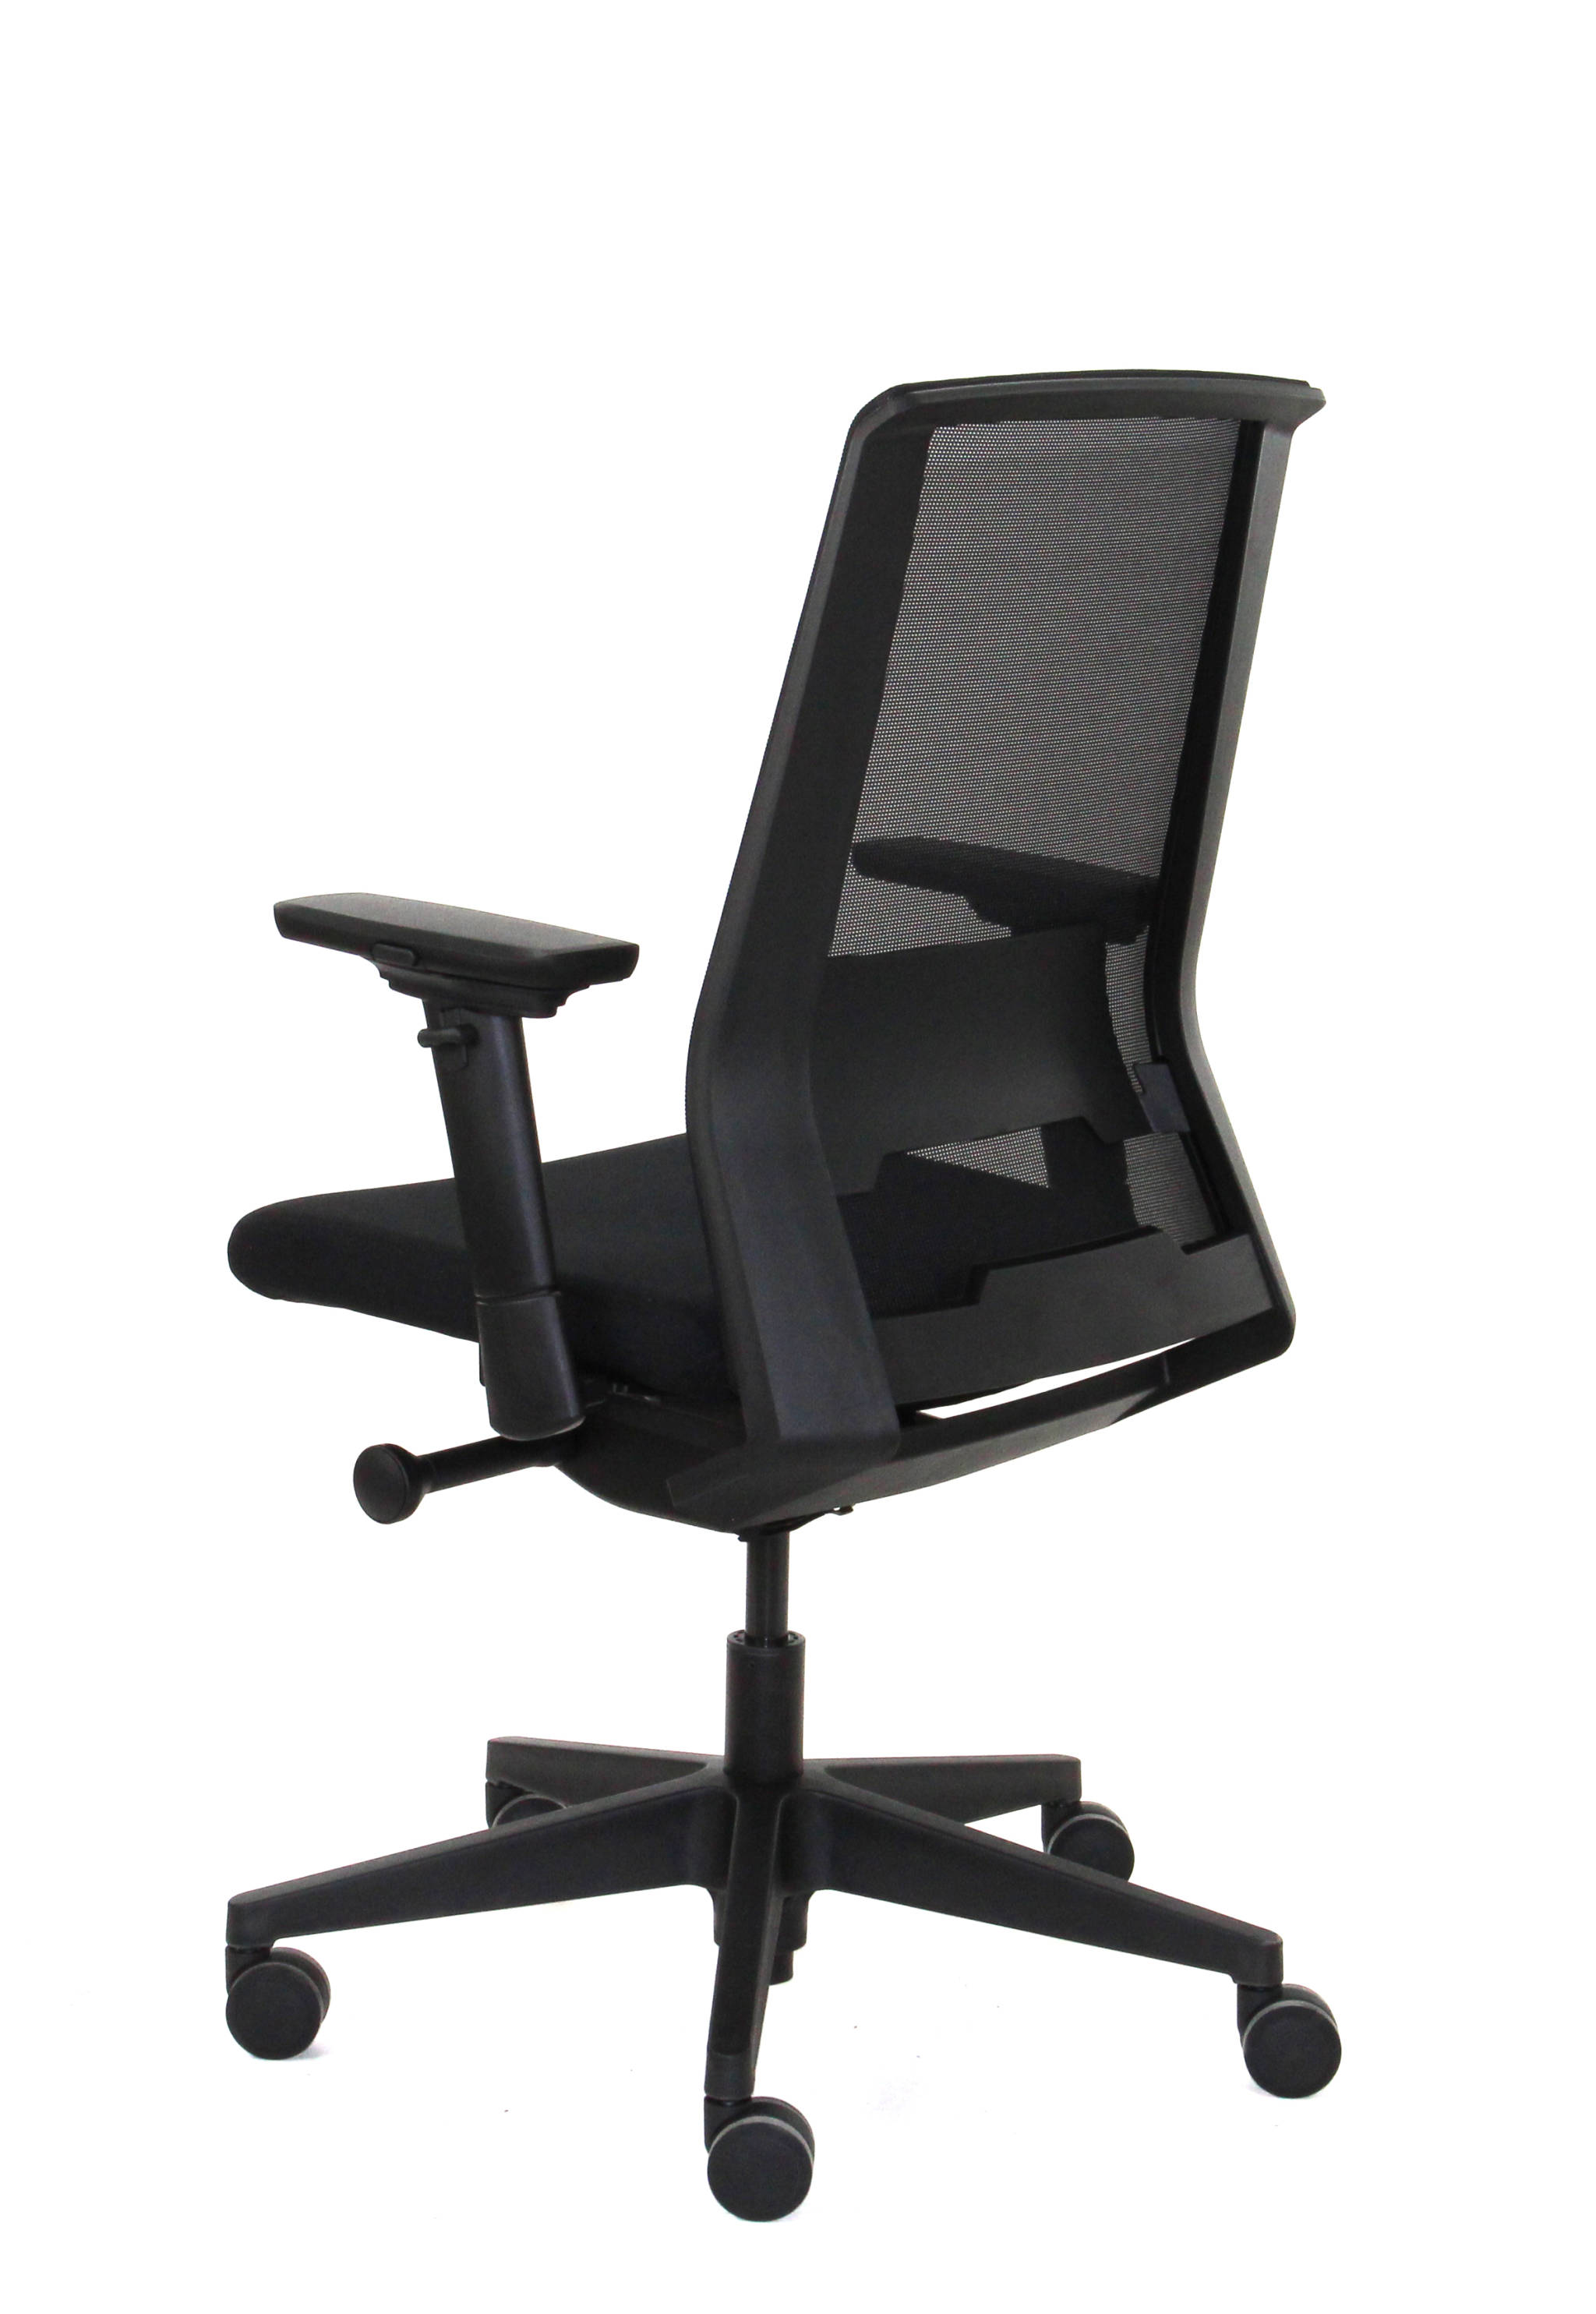 Office chair Lugano 2.0 by SKEPP